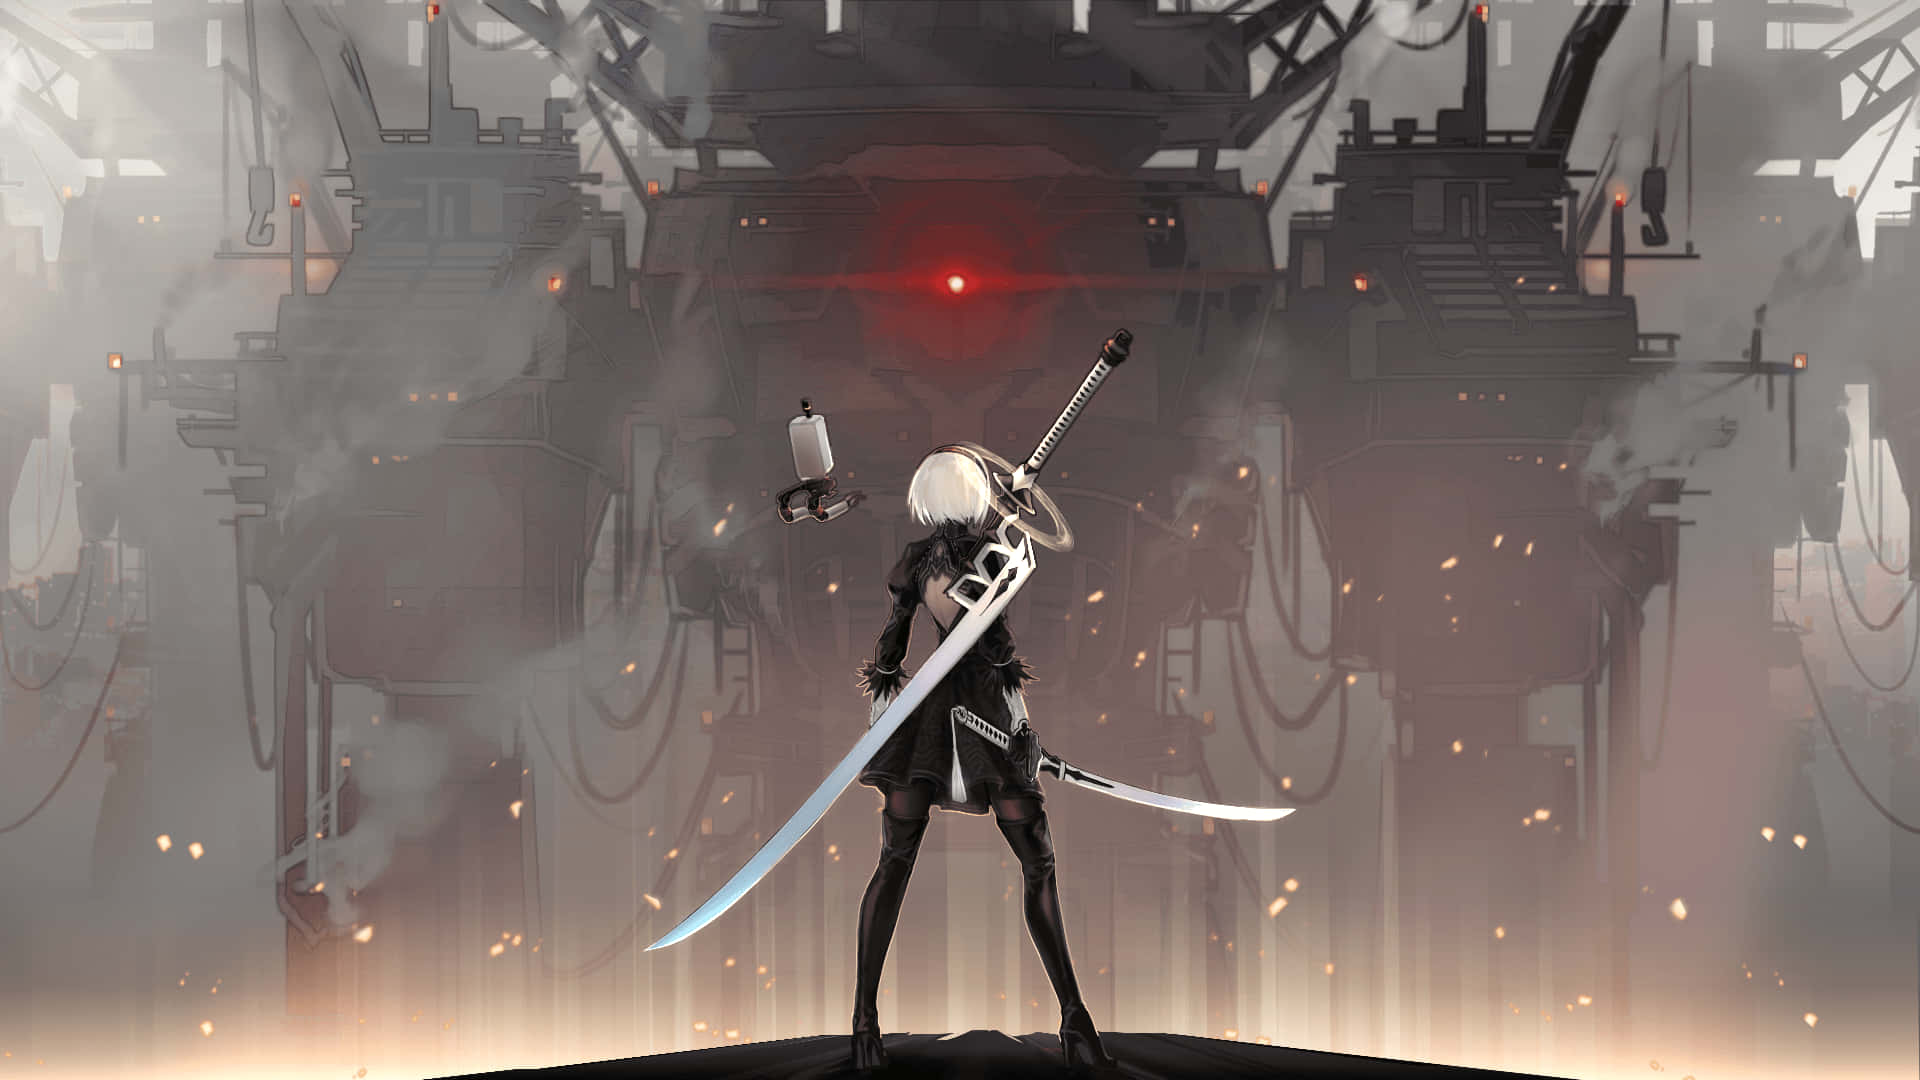 2B, an Andriod from the action RPG game NieR: Automata